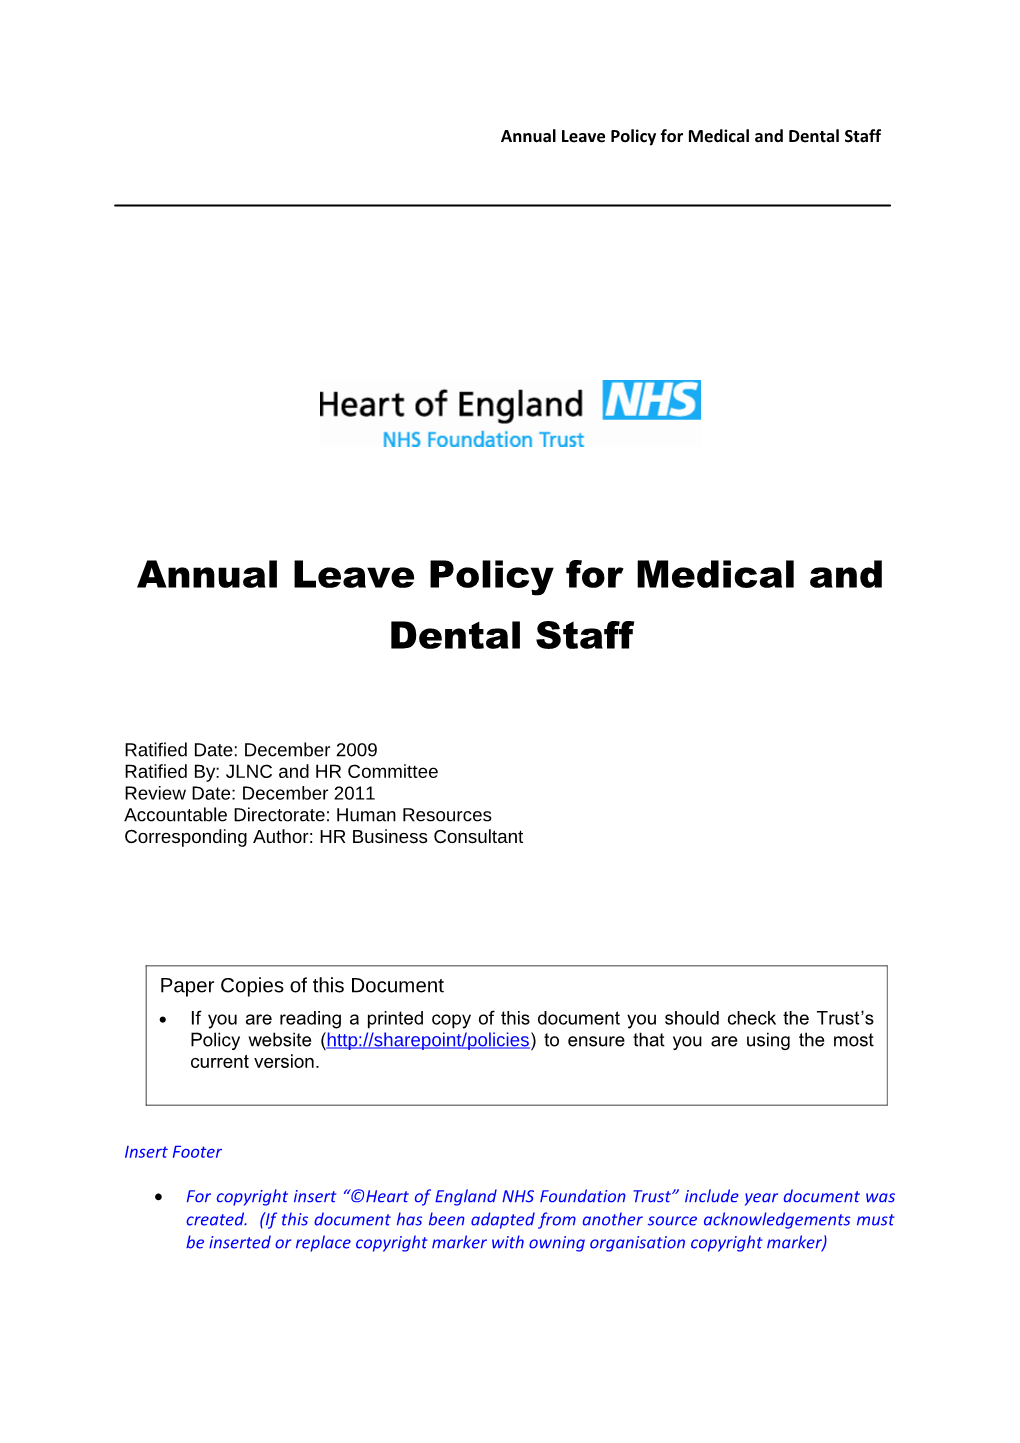 Annual Leave Policy for Medical and Dental Staff